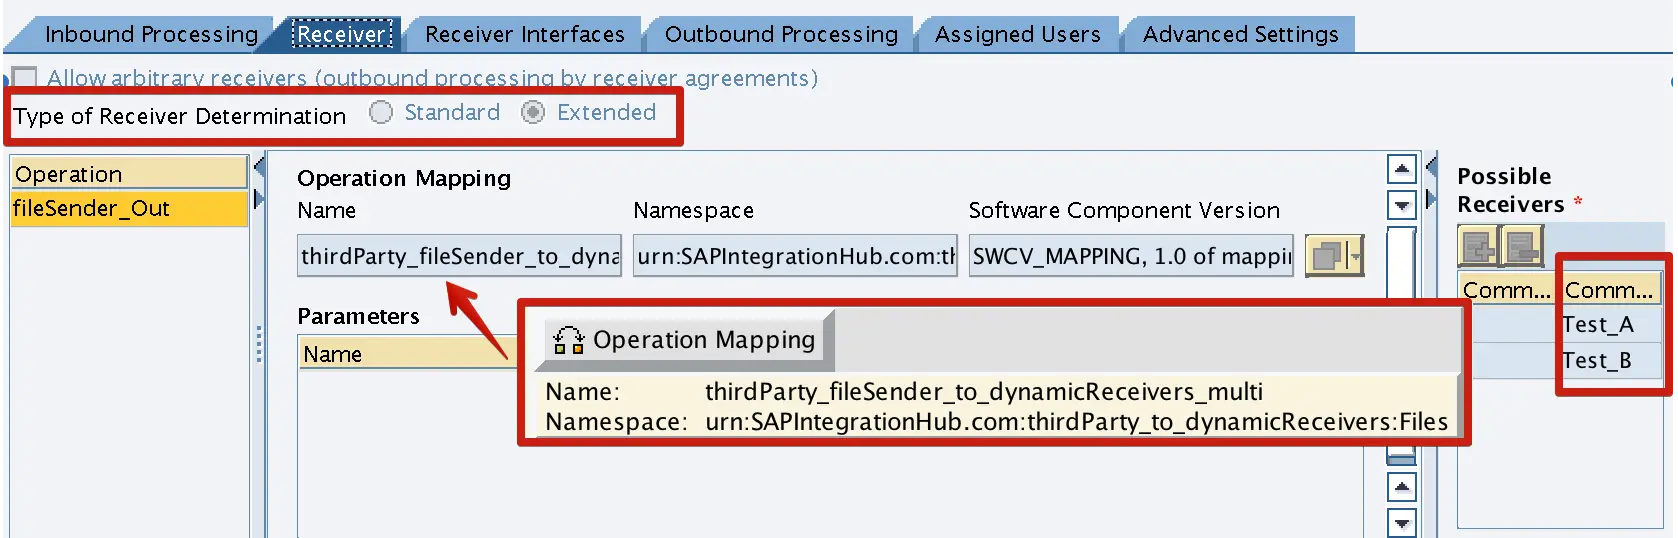 Integration Configuration Object Type of Receiver Determination - Extended